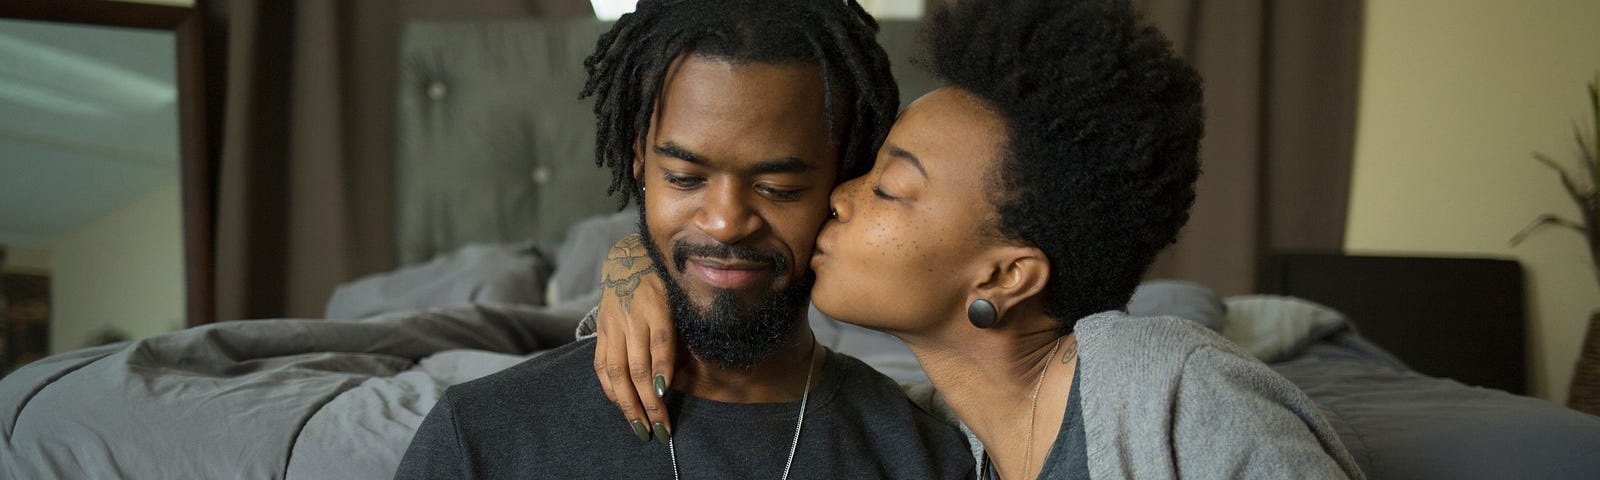 A photo of a black couple. He is playing keyboard and she kisses him on the cheek.